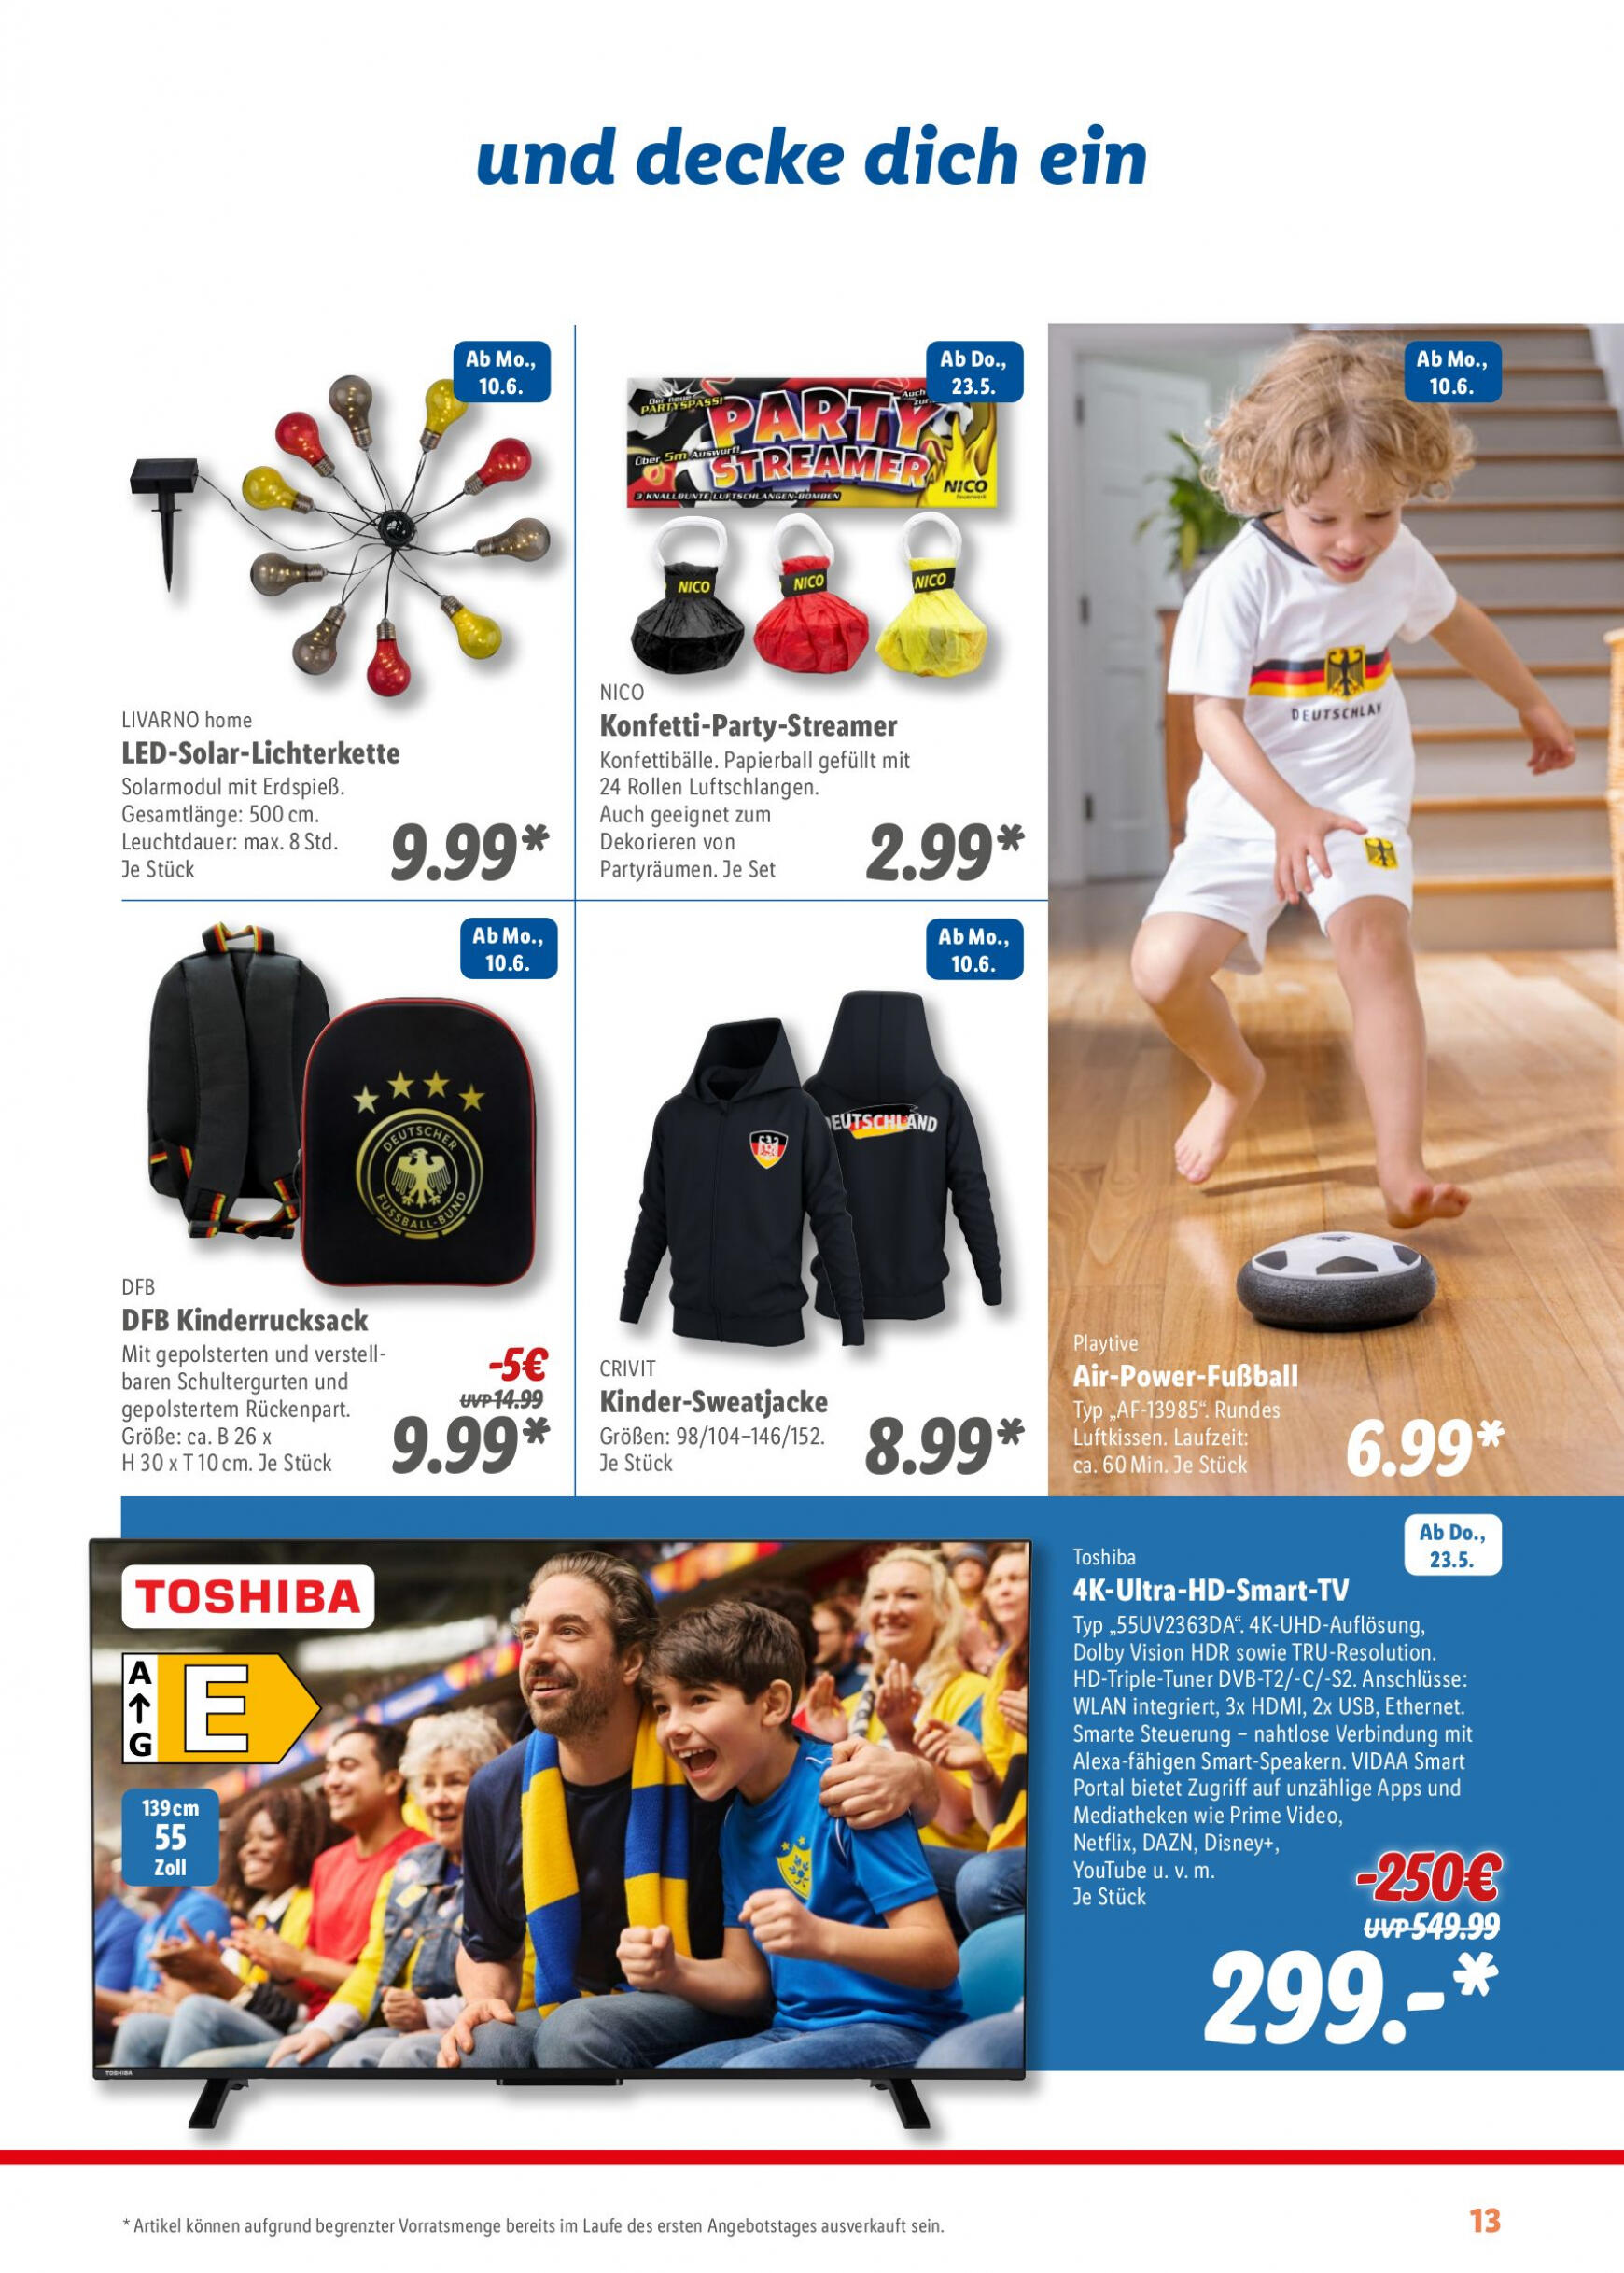 lidl - Flyer Lidl - aktuell 13.05. - 16.06. - page: 13